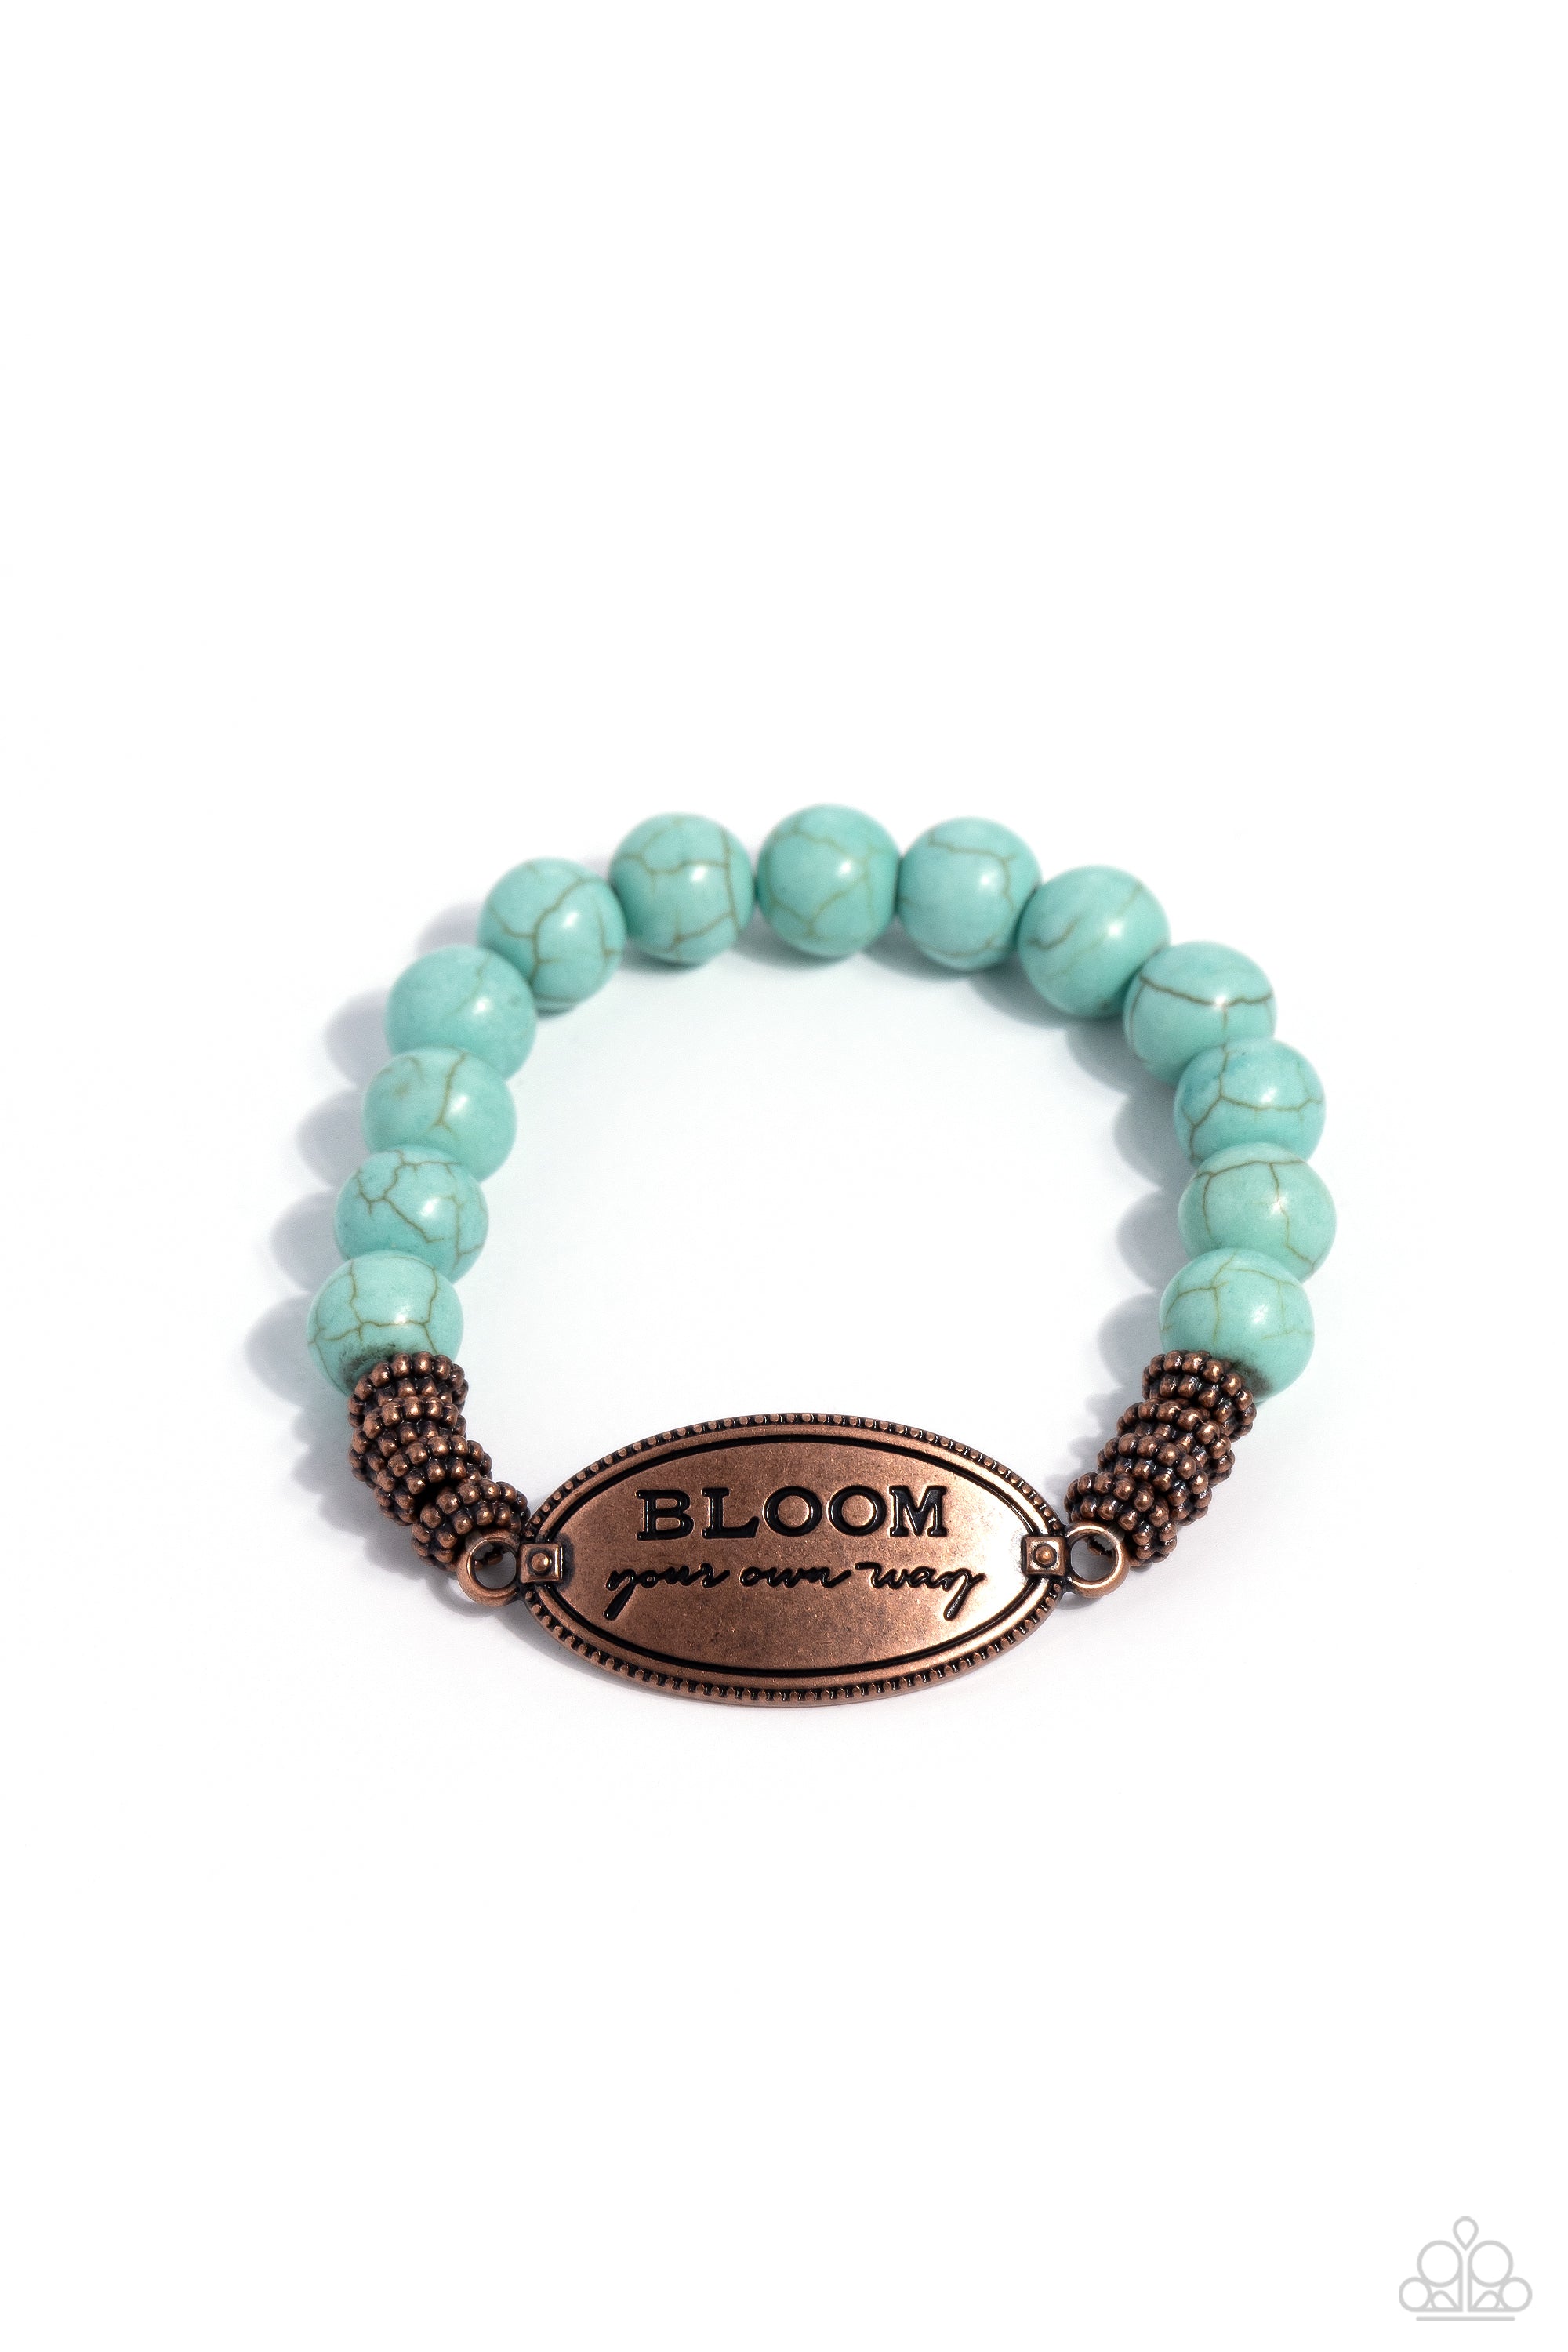 Bedouin Bloom Copper & Turquoise Blue Stone Inspirational Bracelet - Paparazzi Accessories- lightbox - CarasShop.com - $5 Jewelry by Cara Jewels